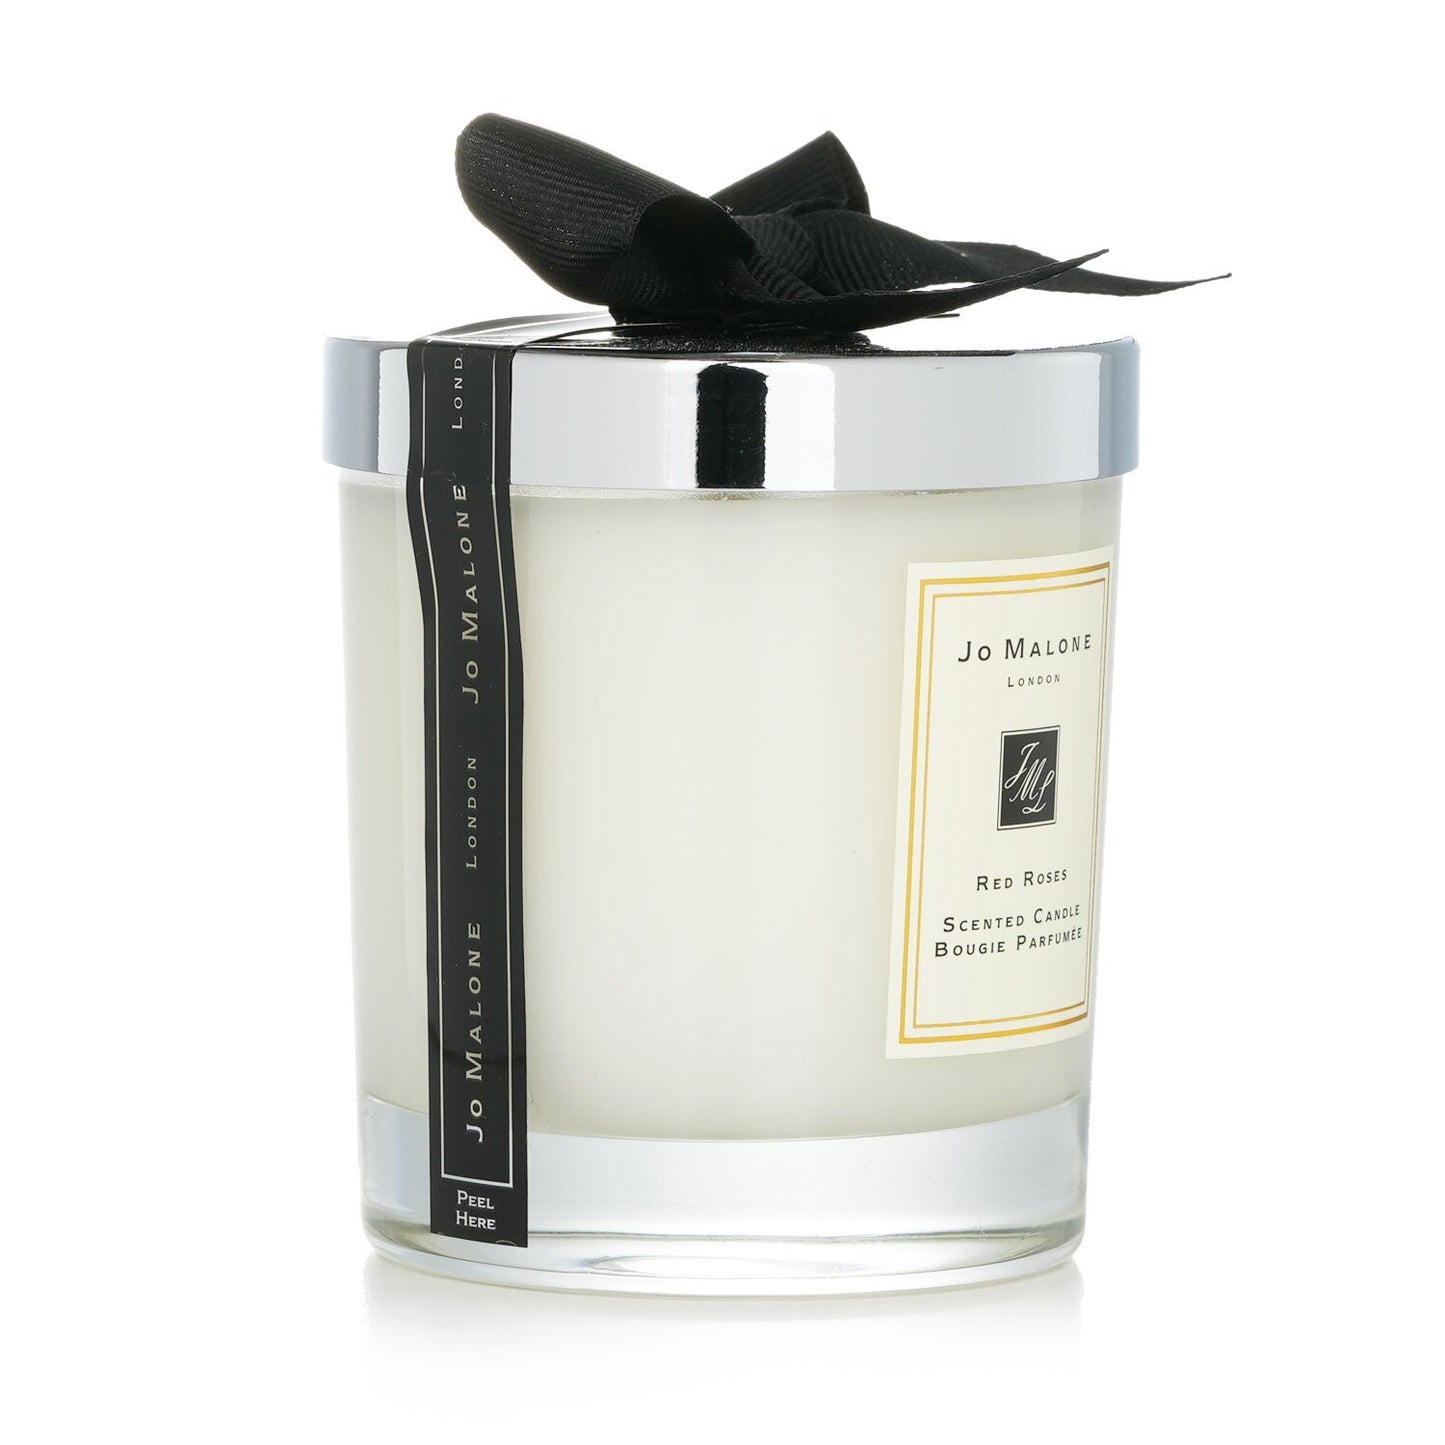 JO MALONE - Red Roses Scented Candle 200g (2.5 inch) - lolaluxeshop